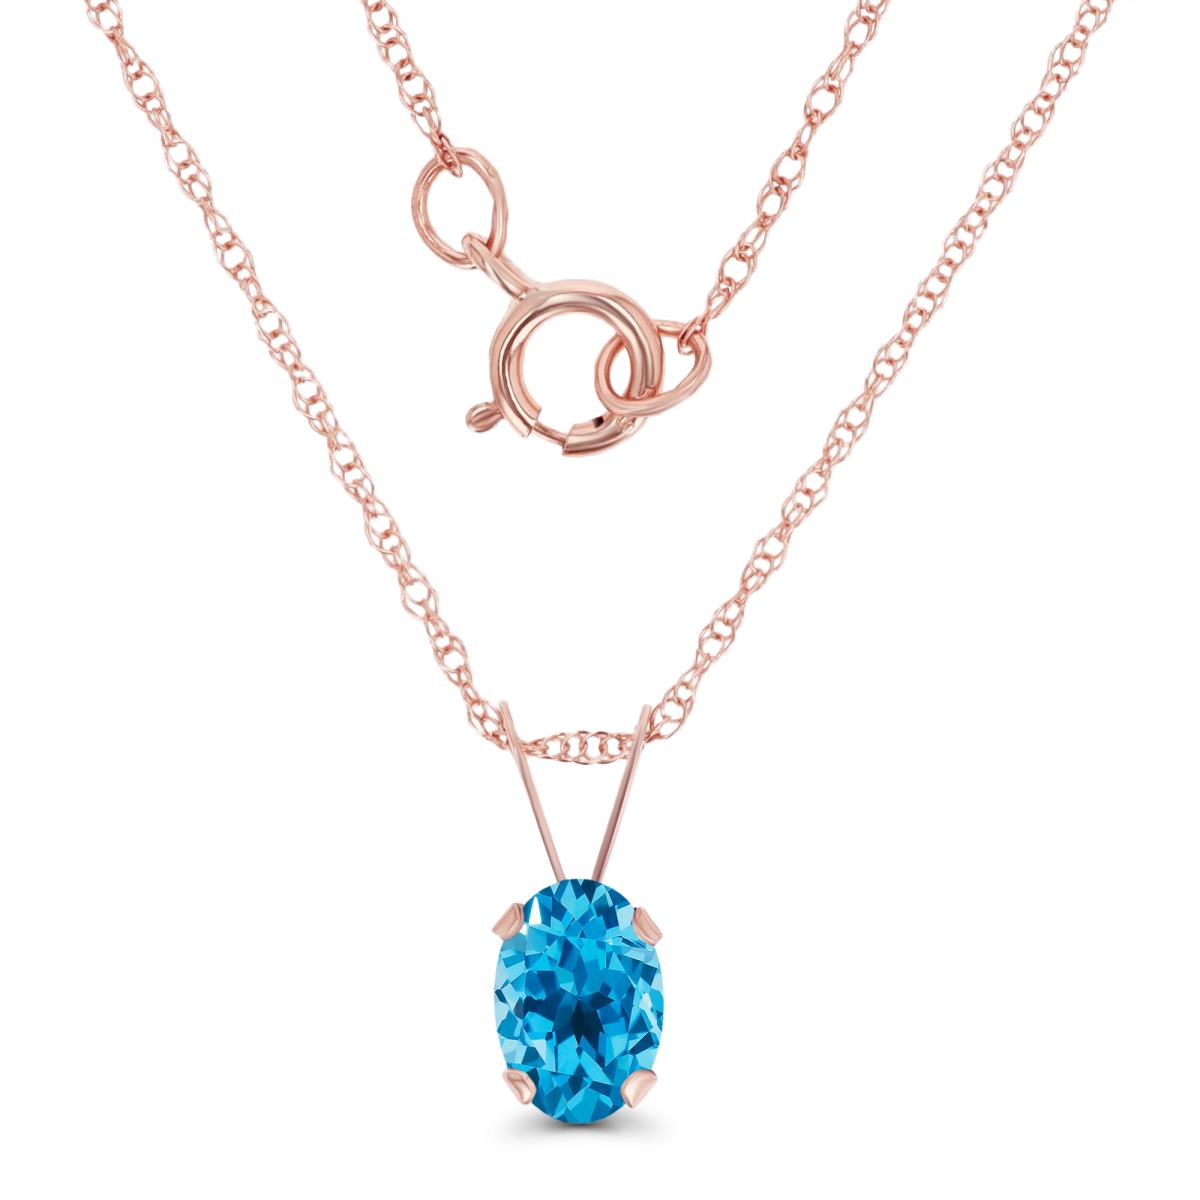 10K Rose Gold 6x4mm Oval Swiss Blue Topaz 18" Rope Chain Necklace